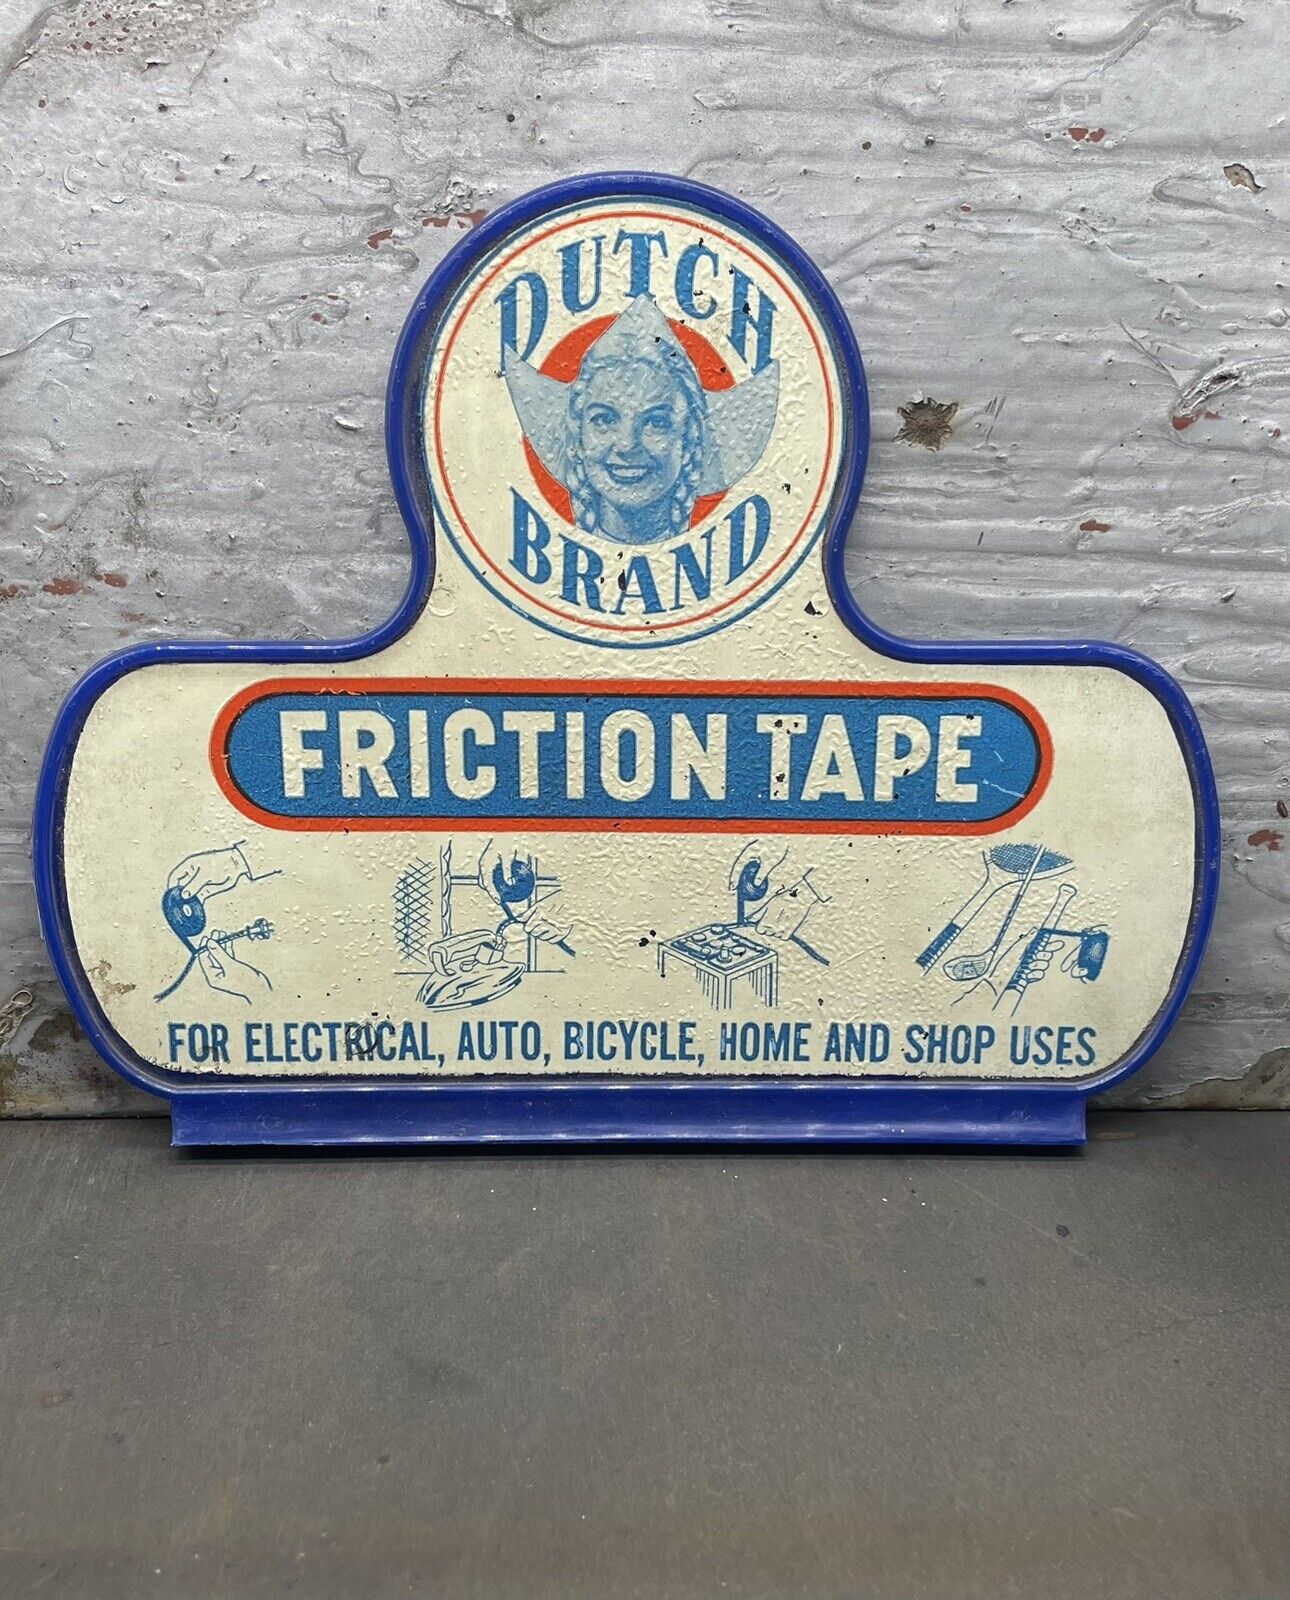 Vintage Dutch Brand Friction Tape Store Display Plastic Sign Multi Use Tape